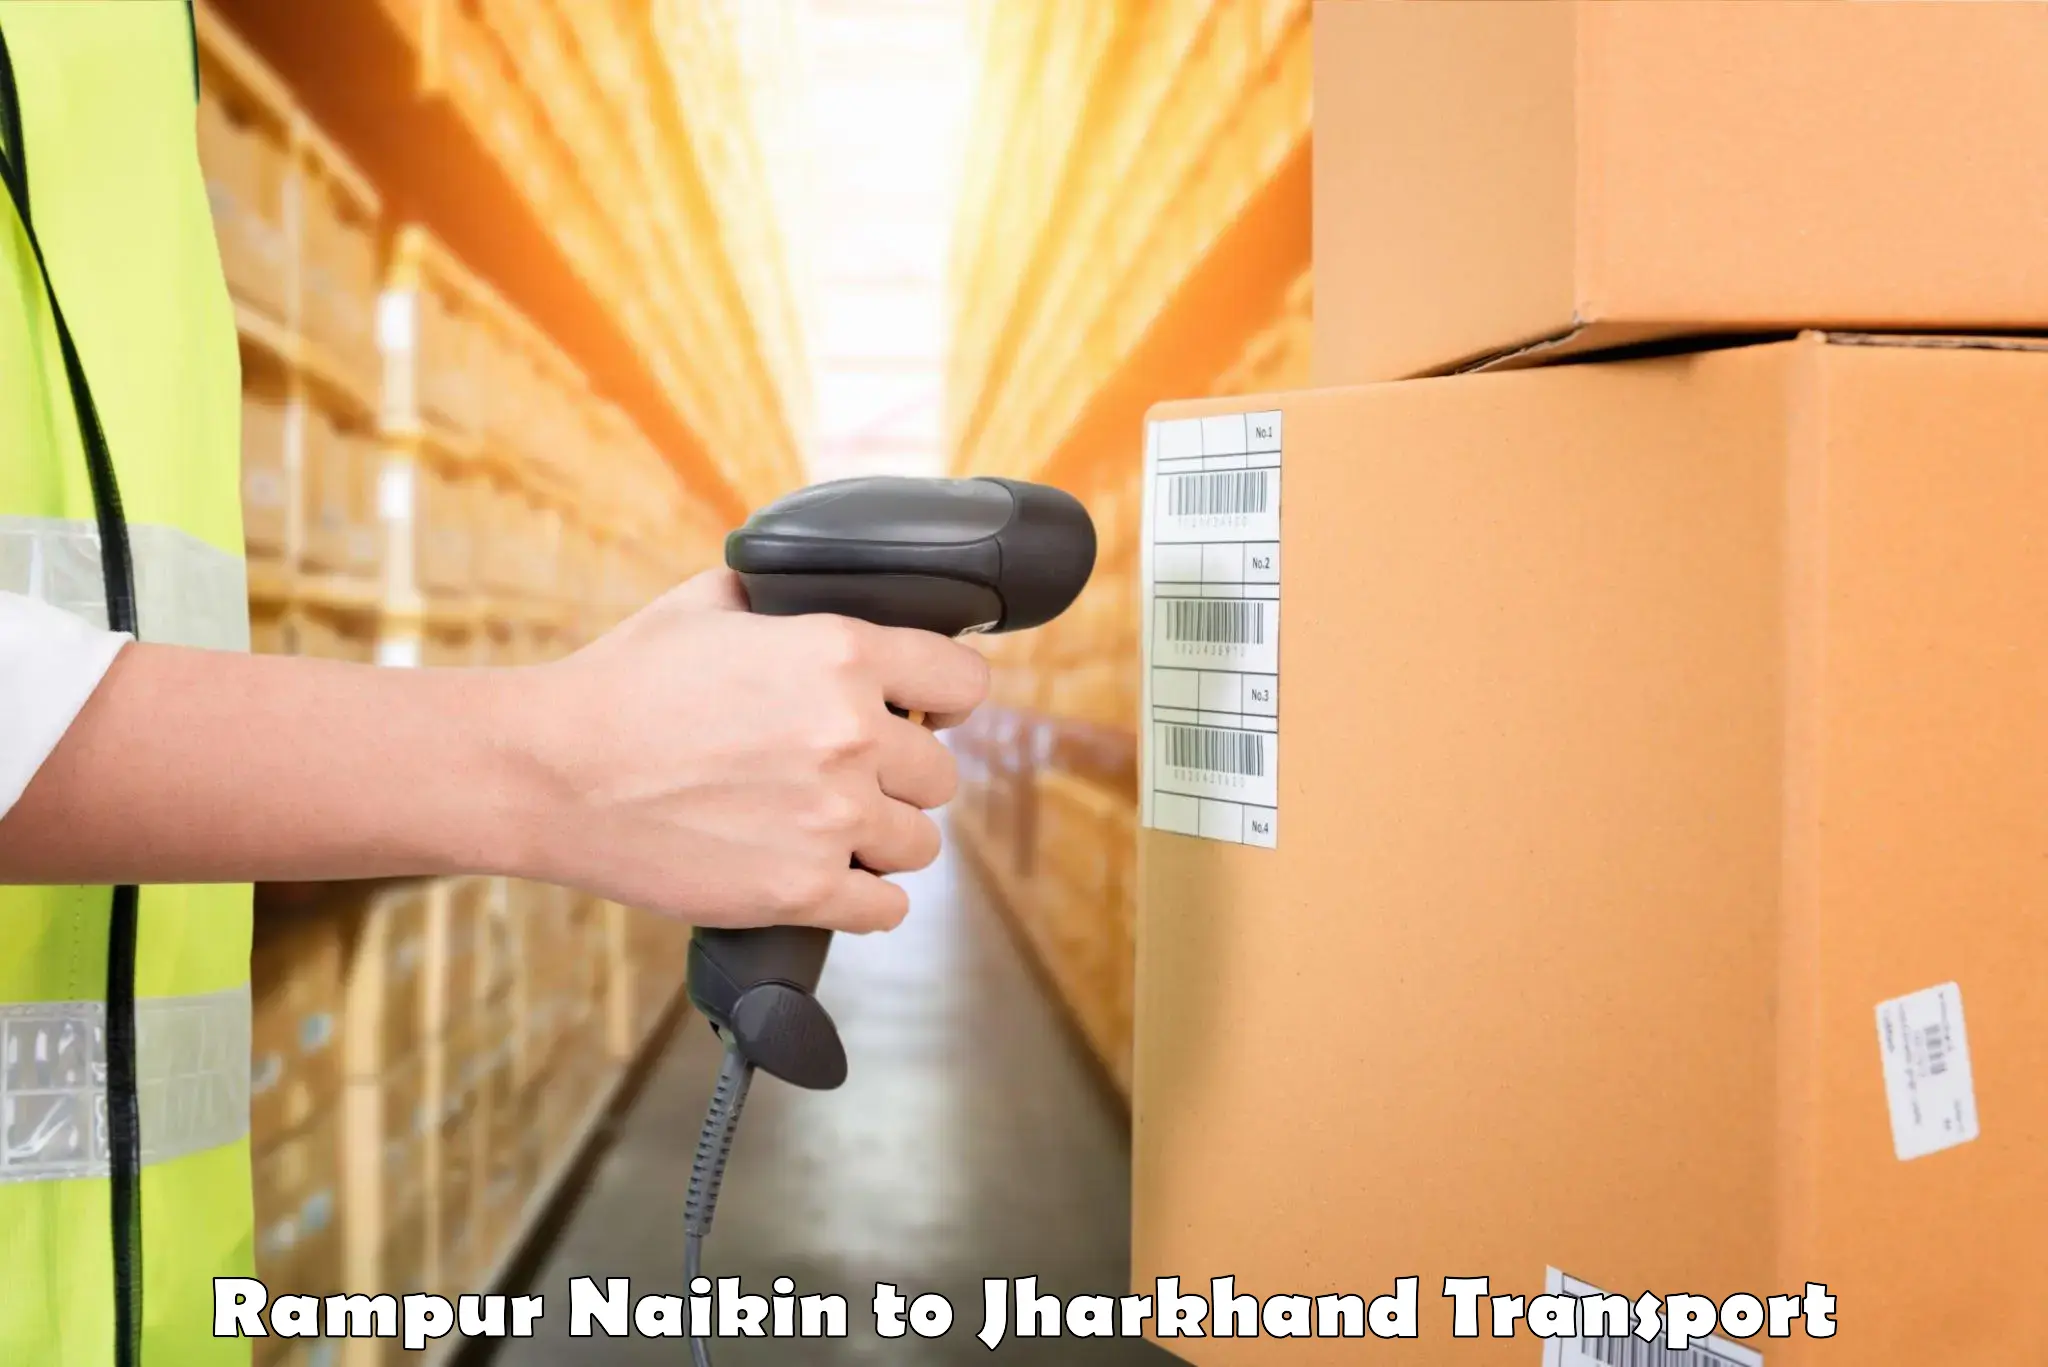 Goods delivery service Rampur Naikin to IIT Dhanbad